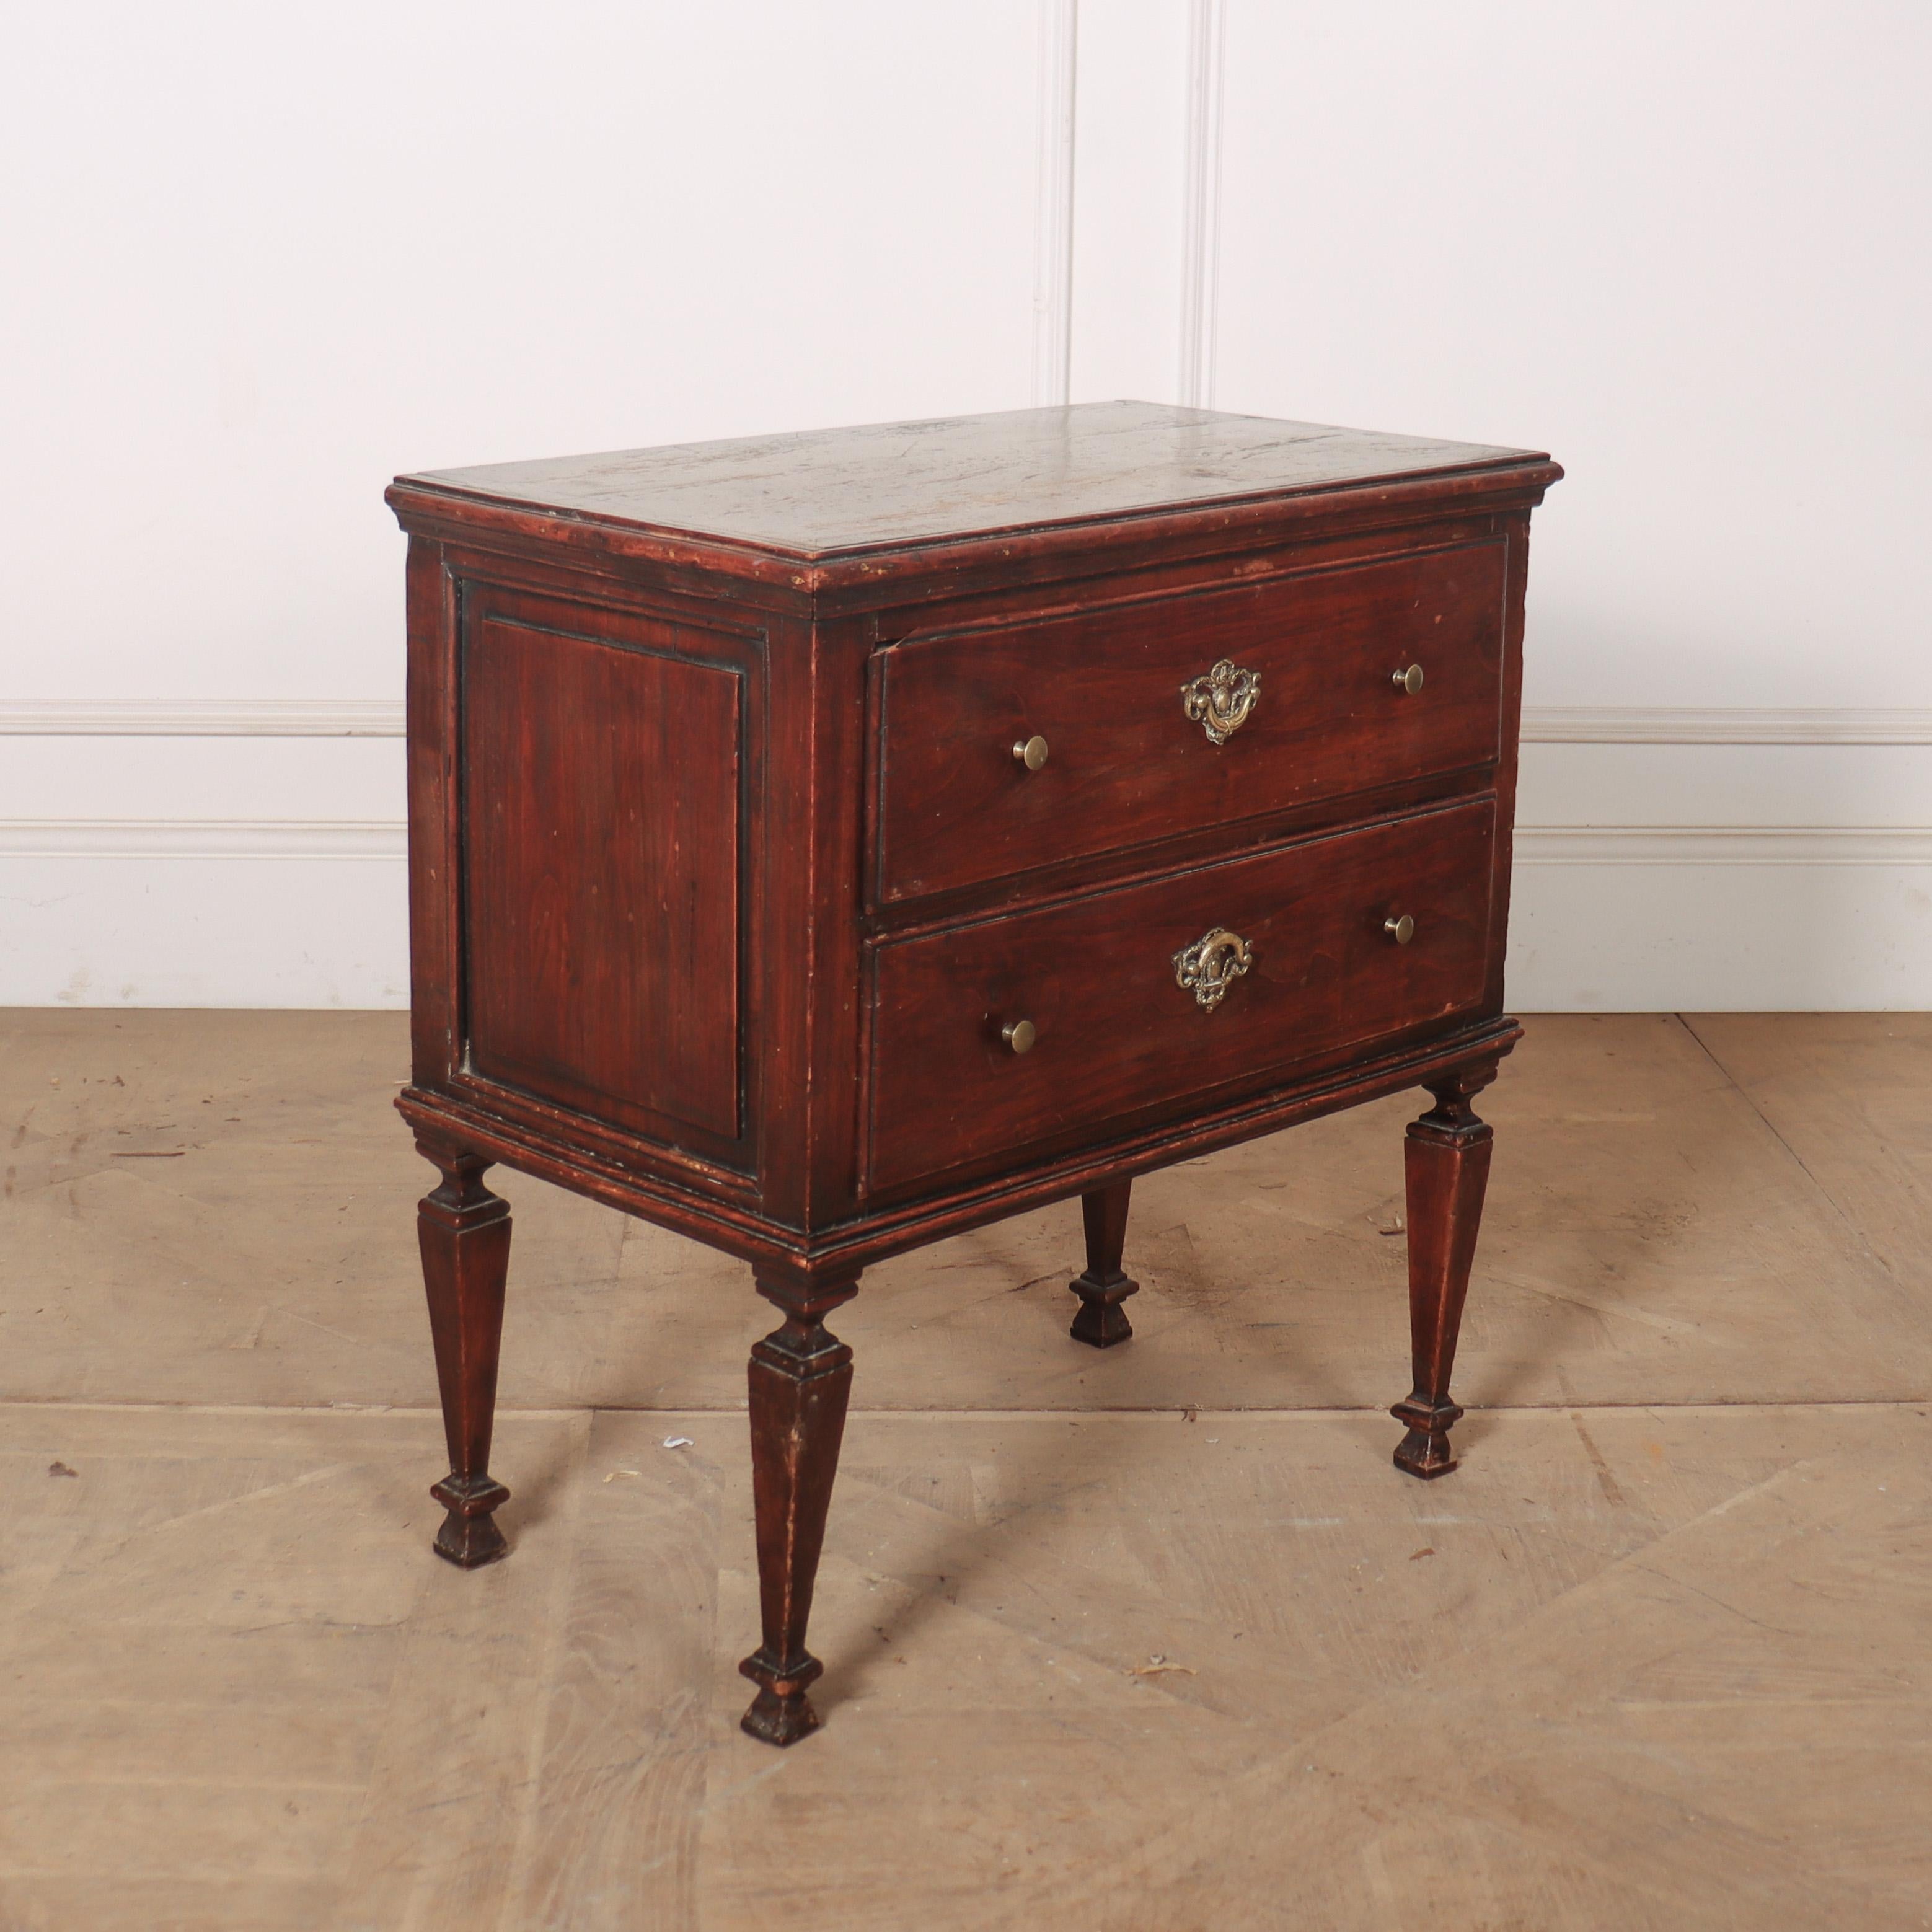 Small 18th C two drawer Italian walnut commode. 1790.

Reference: 8184

Dimensions
23.5 inches (60 cms) Wide
13.5 inches (34 cms) Deep
25 inches (64 cms) High